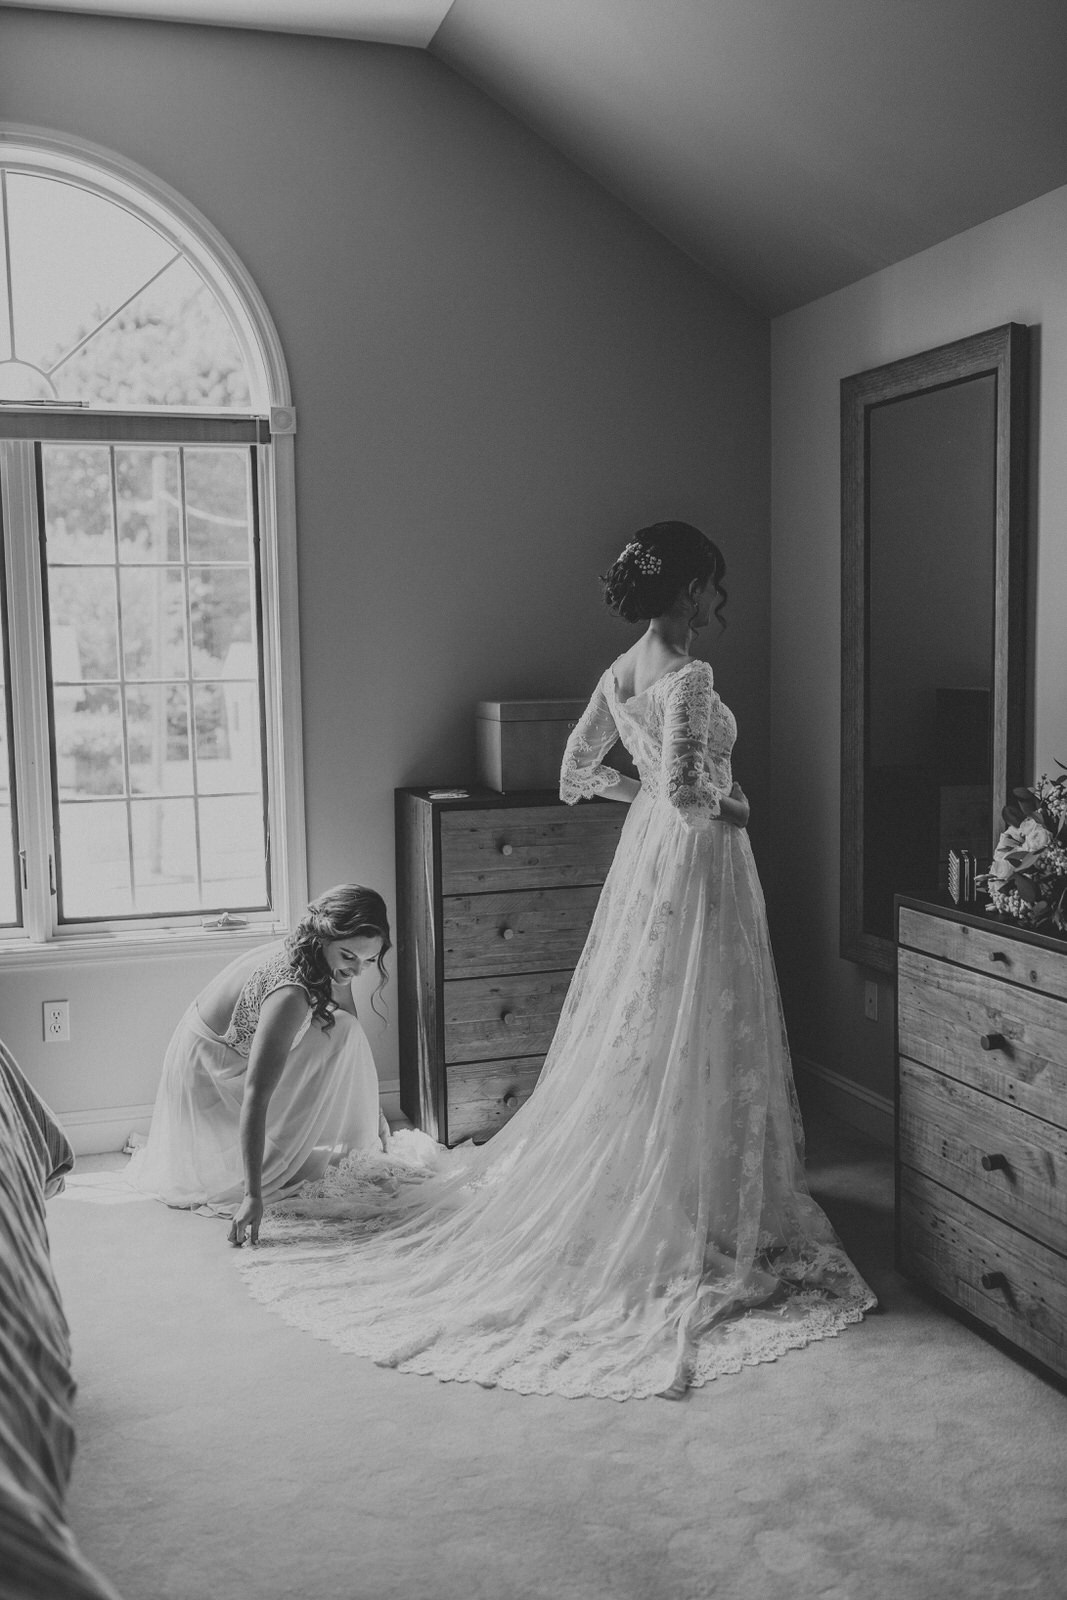 Bride looking at herself in the mirror after getting into her wedding dress